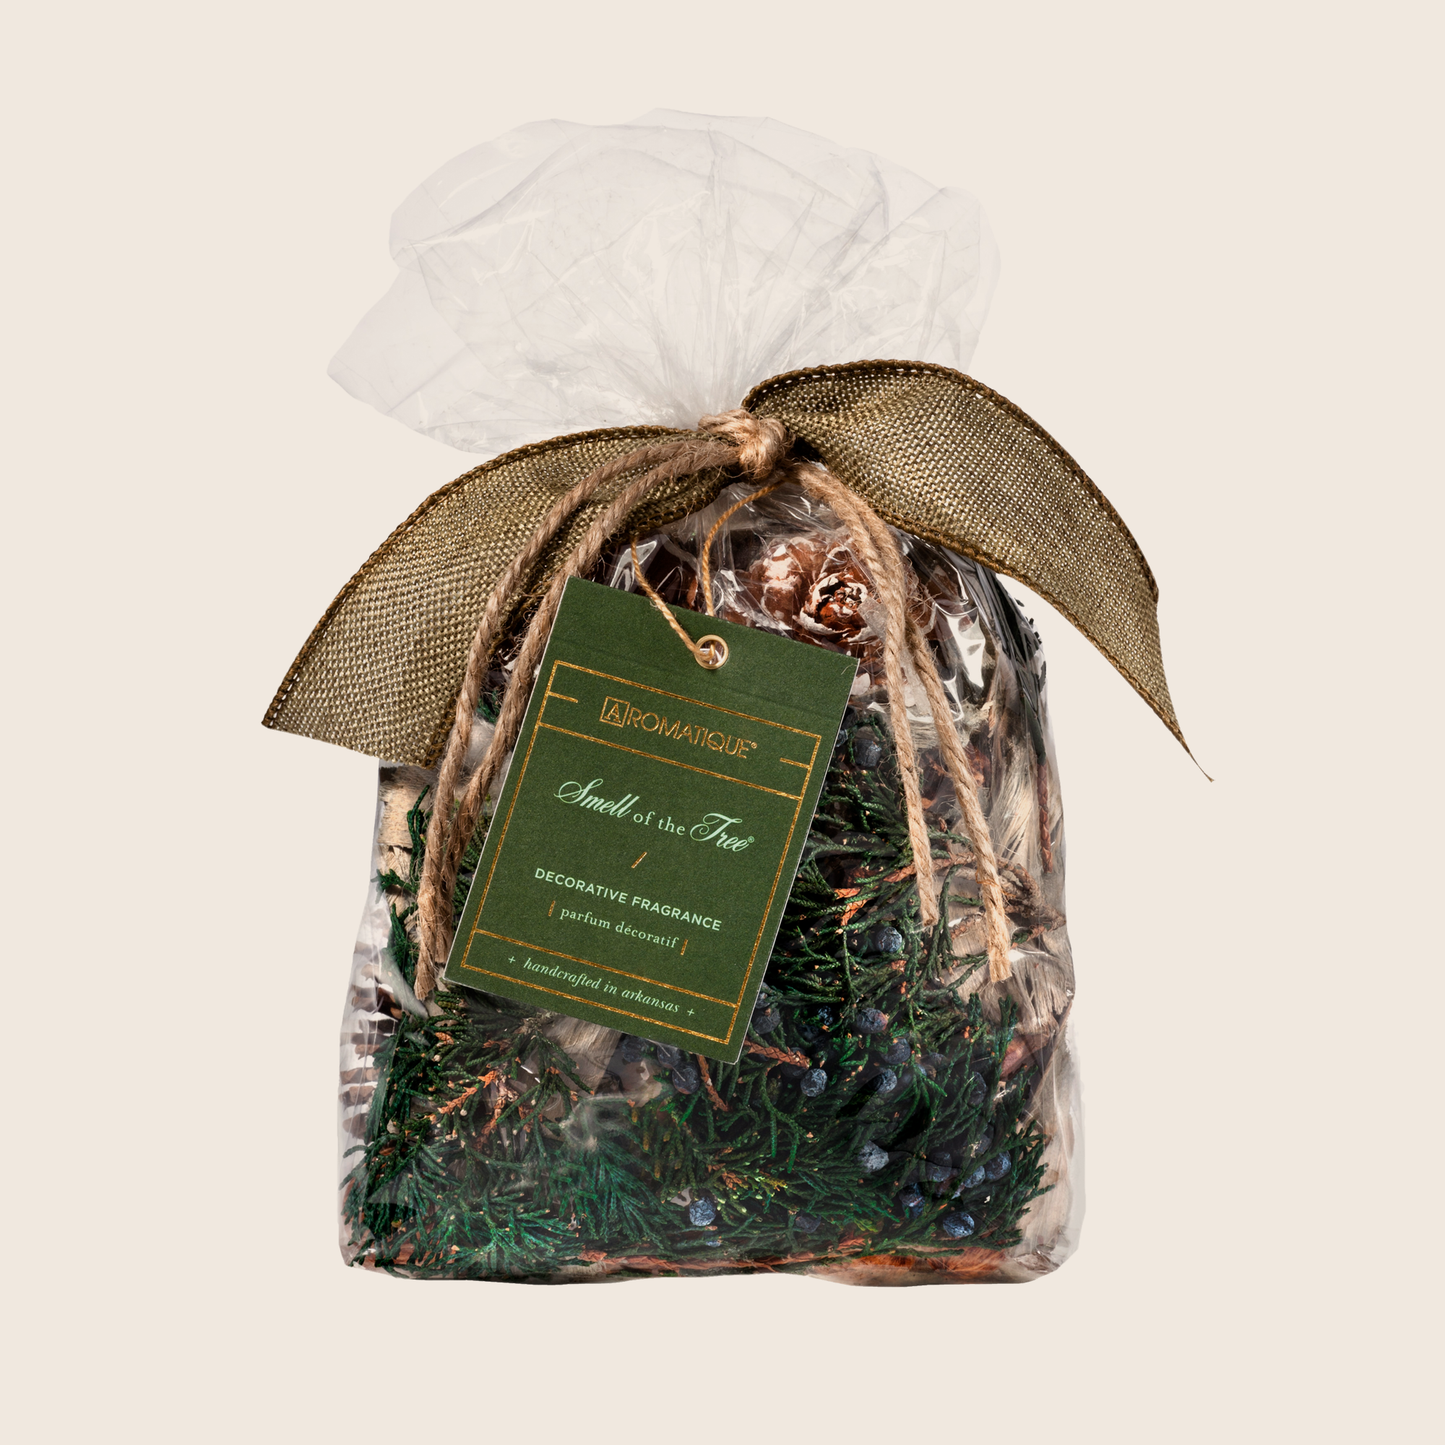 The Smell of Tree - Decorative Fragrance - Aromatique